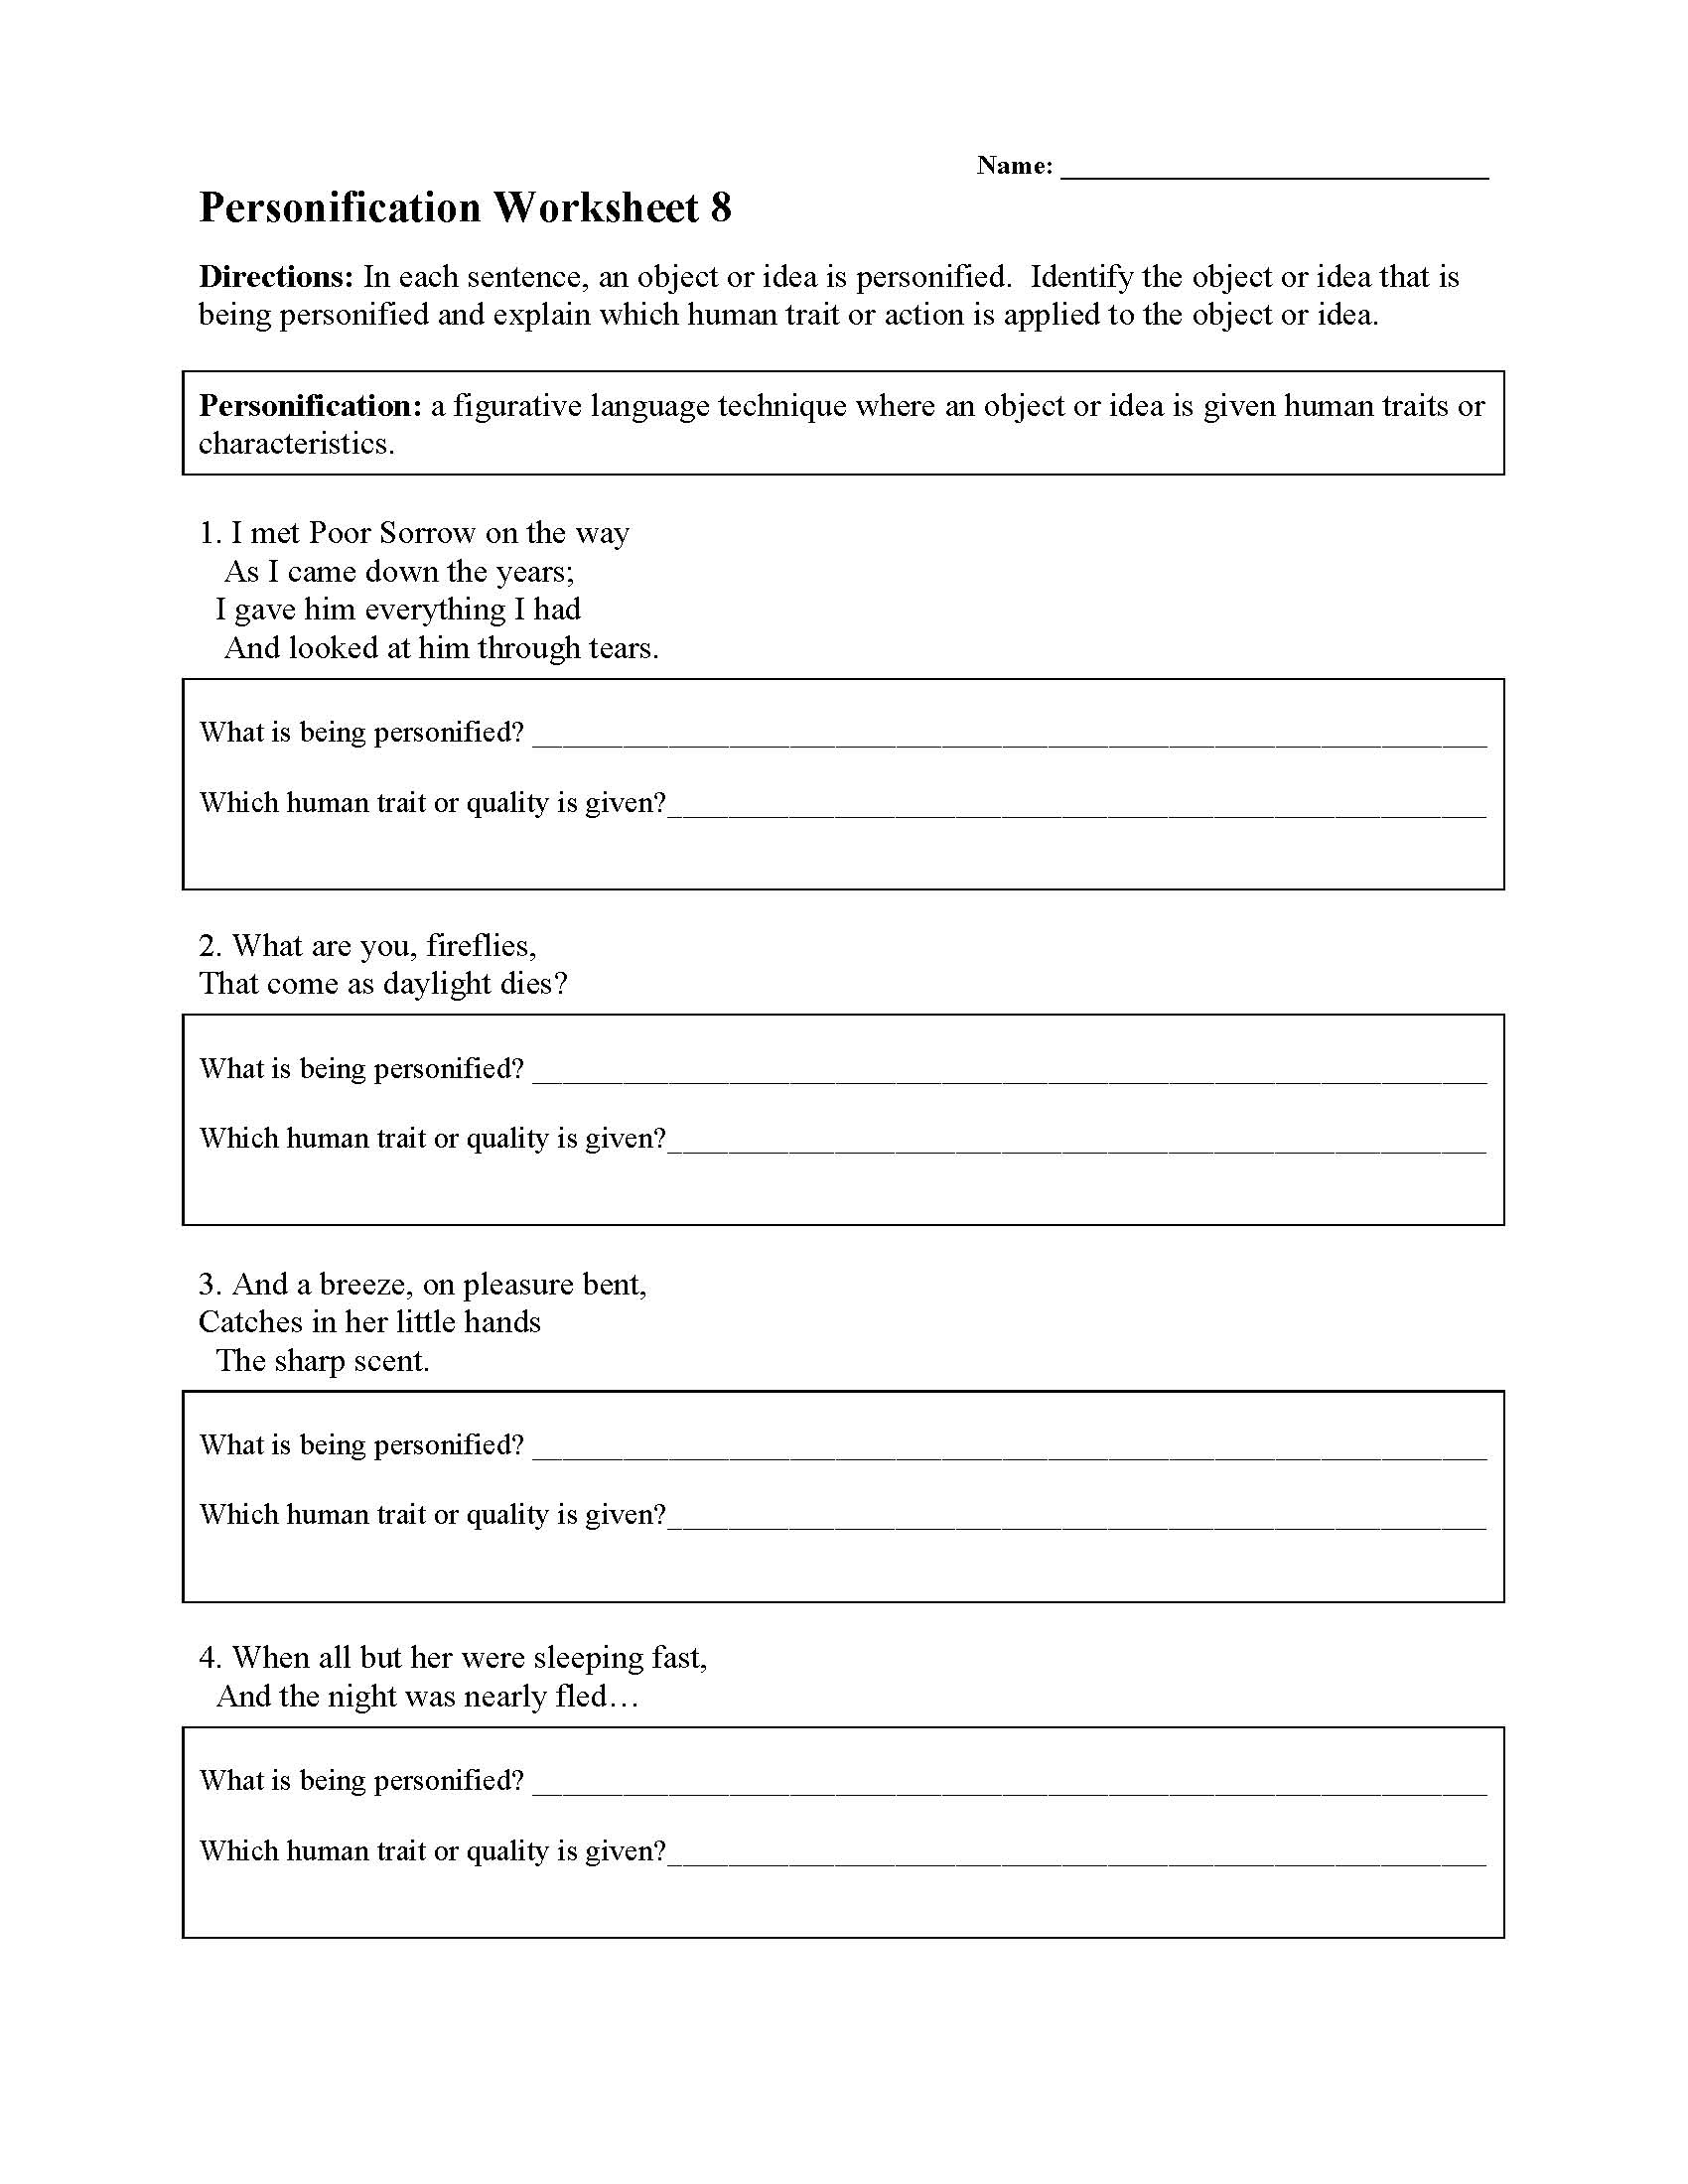 personification worksheets figurative language activities